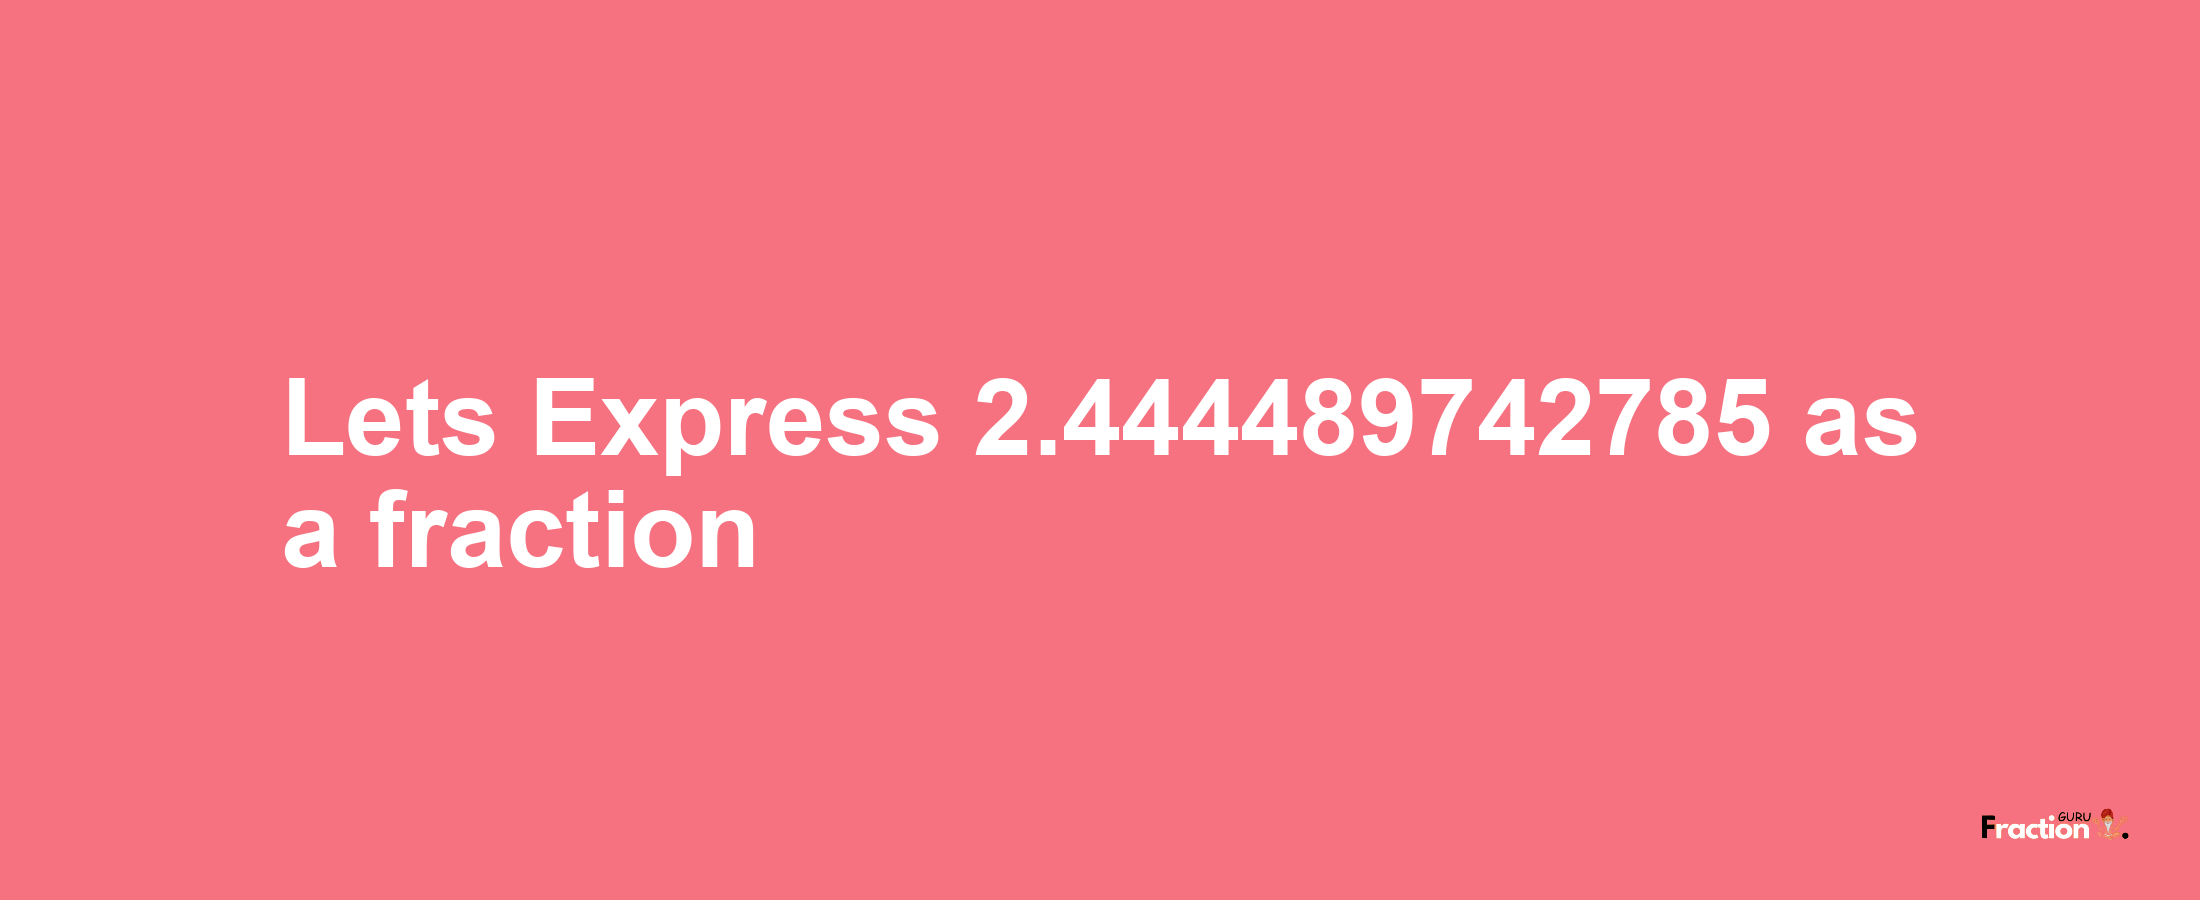 Lets Express 2.444489742785 as afraction